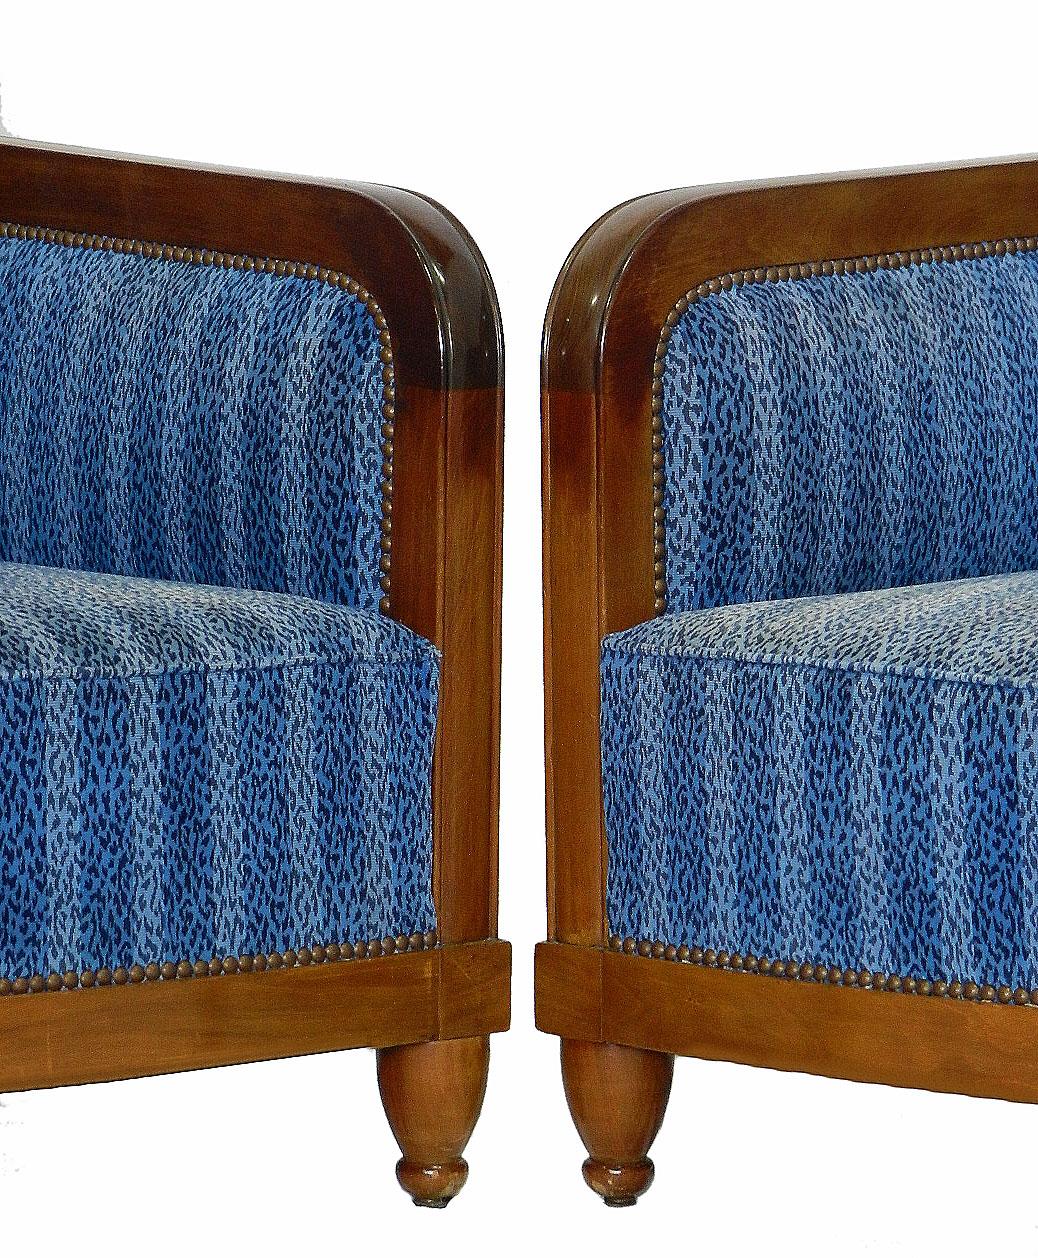 Pair of French Art Deco club chairs, circa 1930
Two armchairs
Mahogany in lovely condition
Upholstery very good, revised not too long ago sound and solid
Printed velour with only very minor signs of wear fine to use as is
Or top covers can be